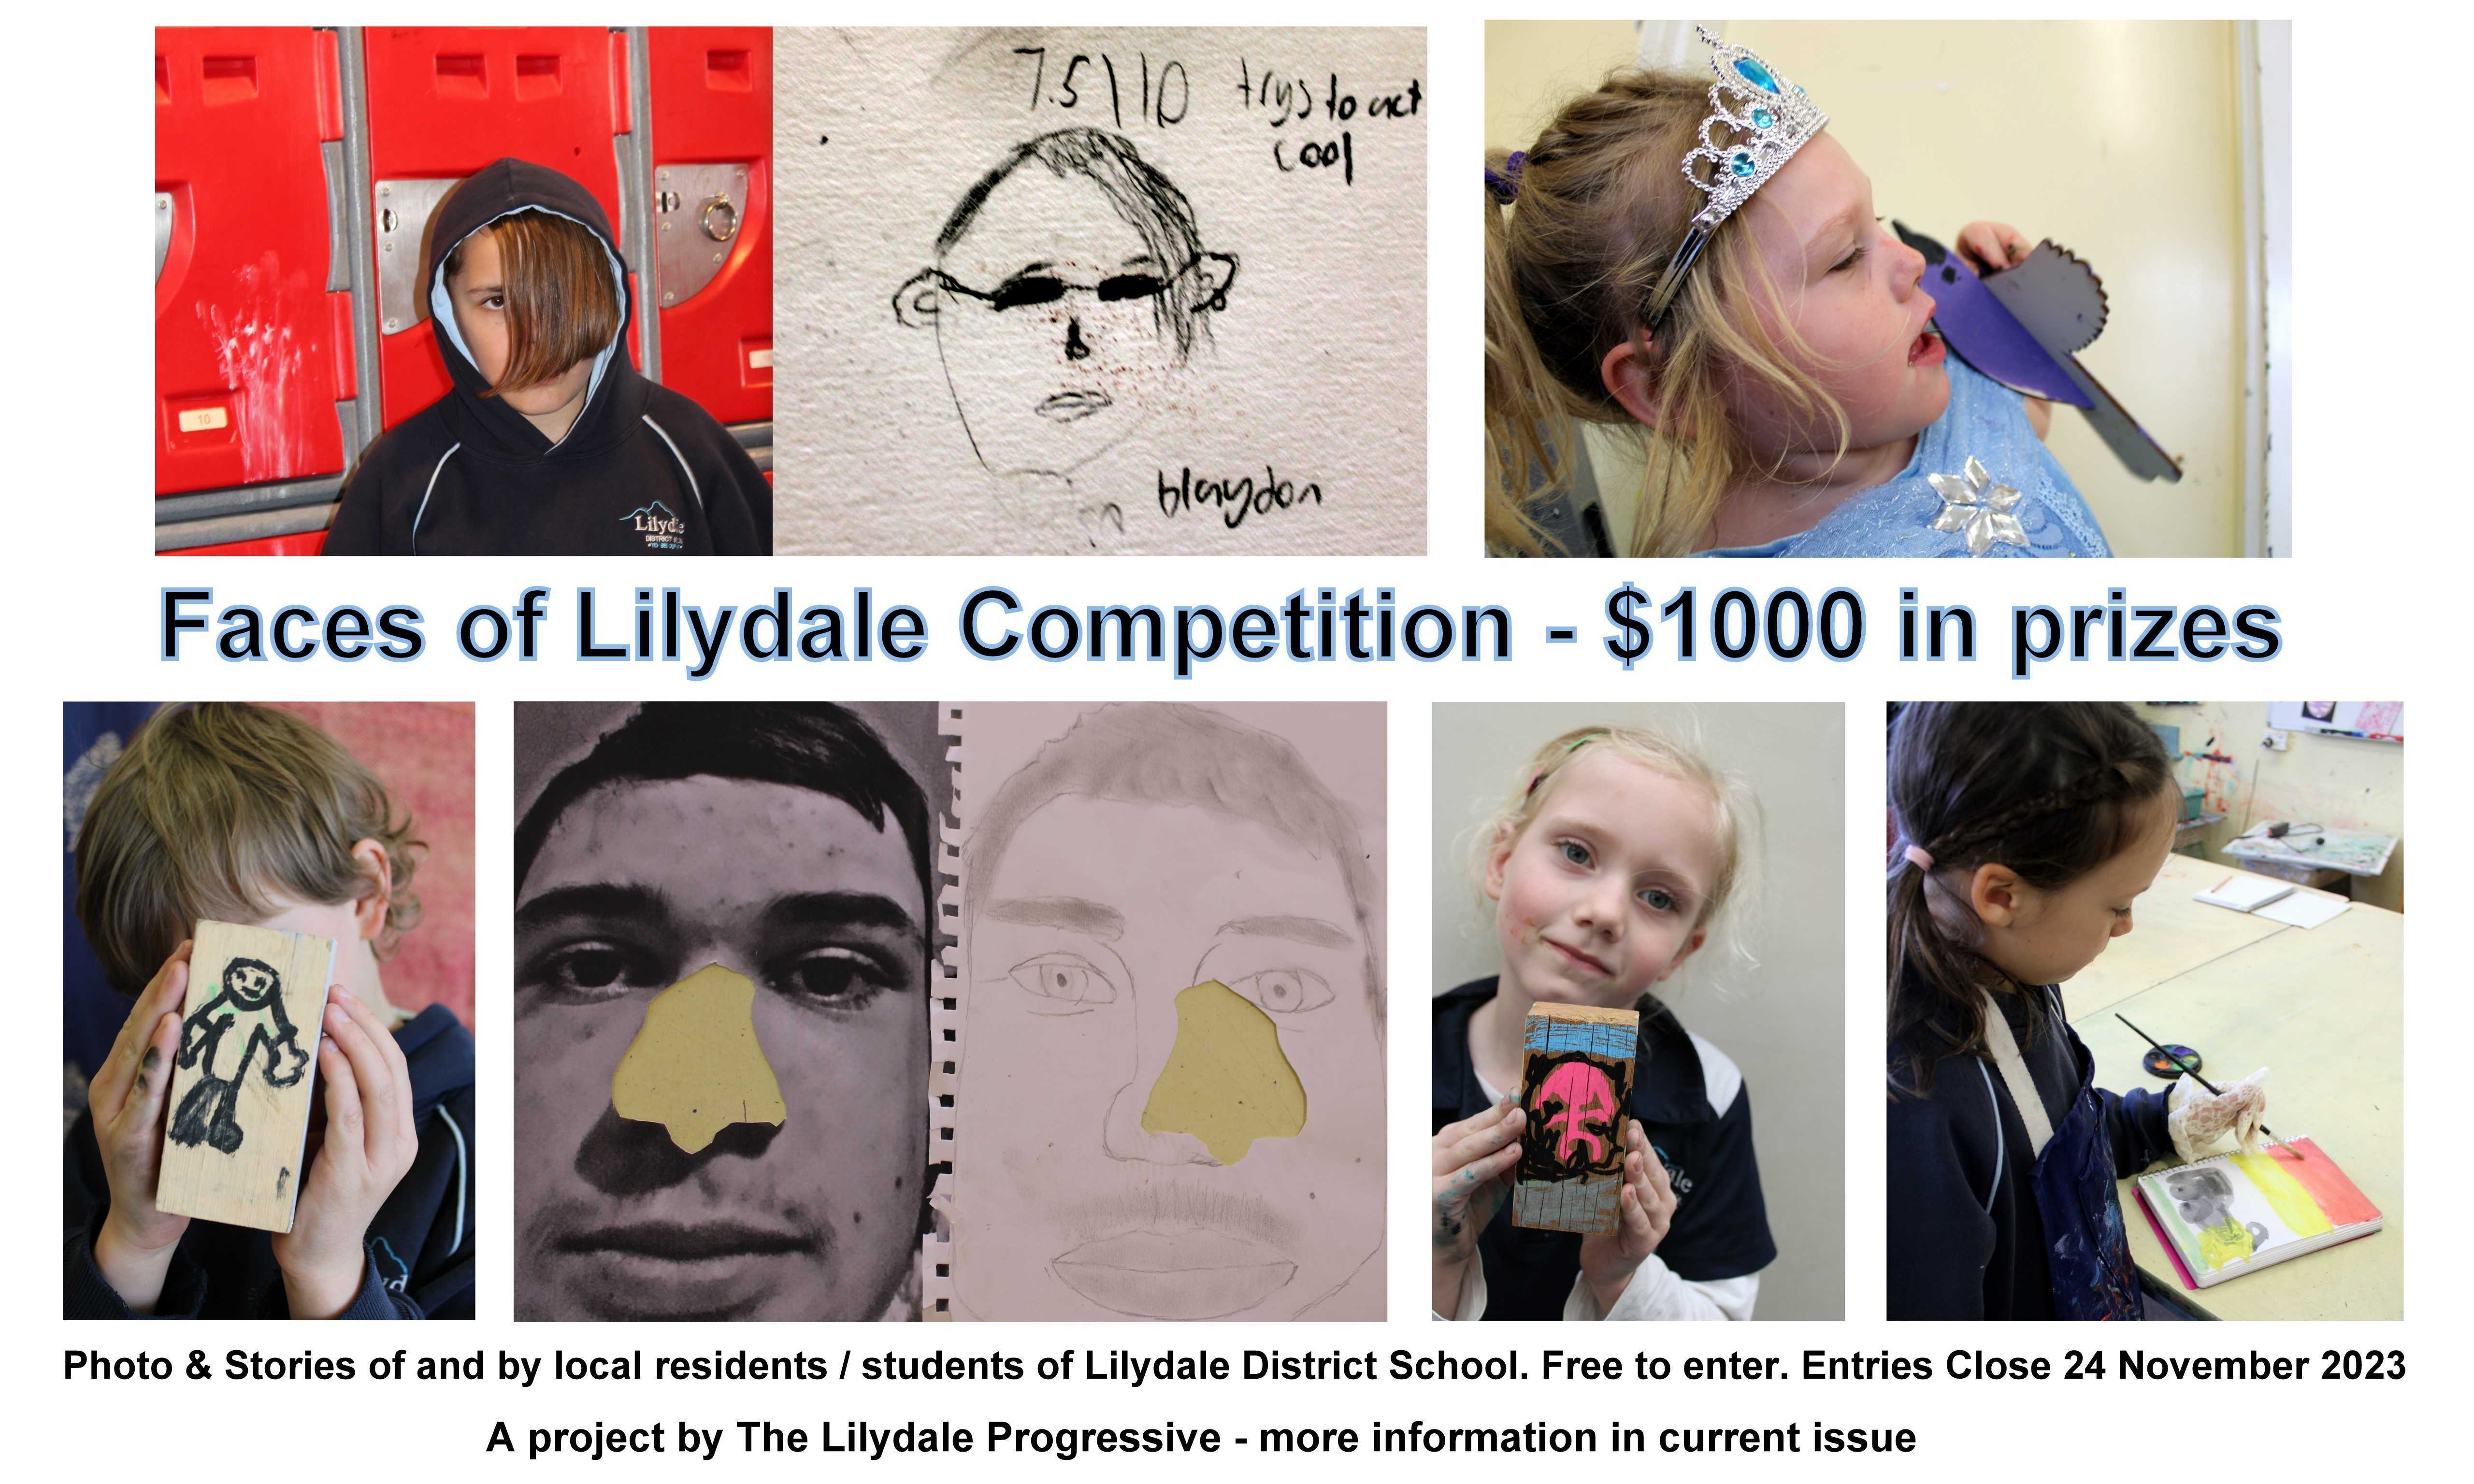 Faces of Lilydale draft with intro text